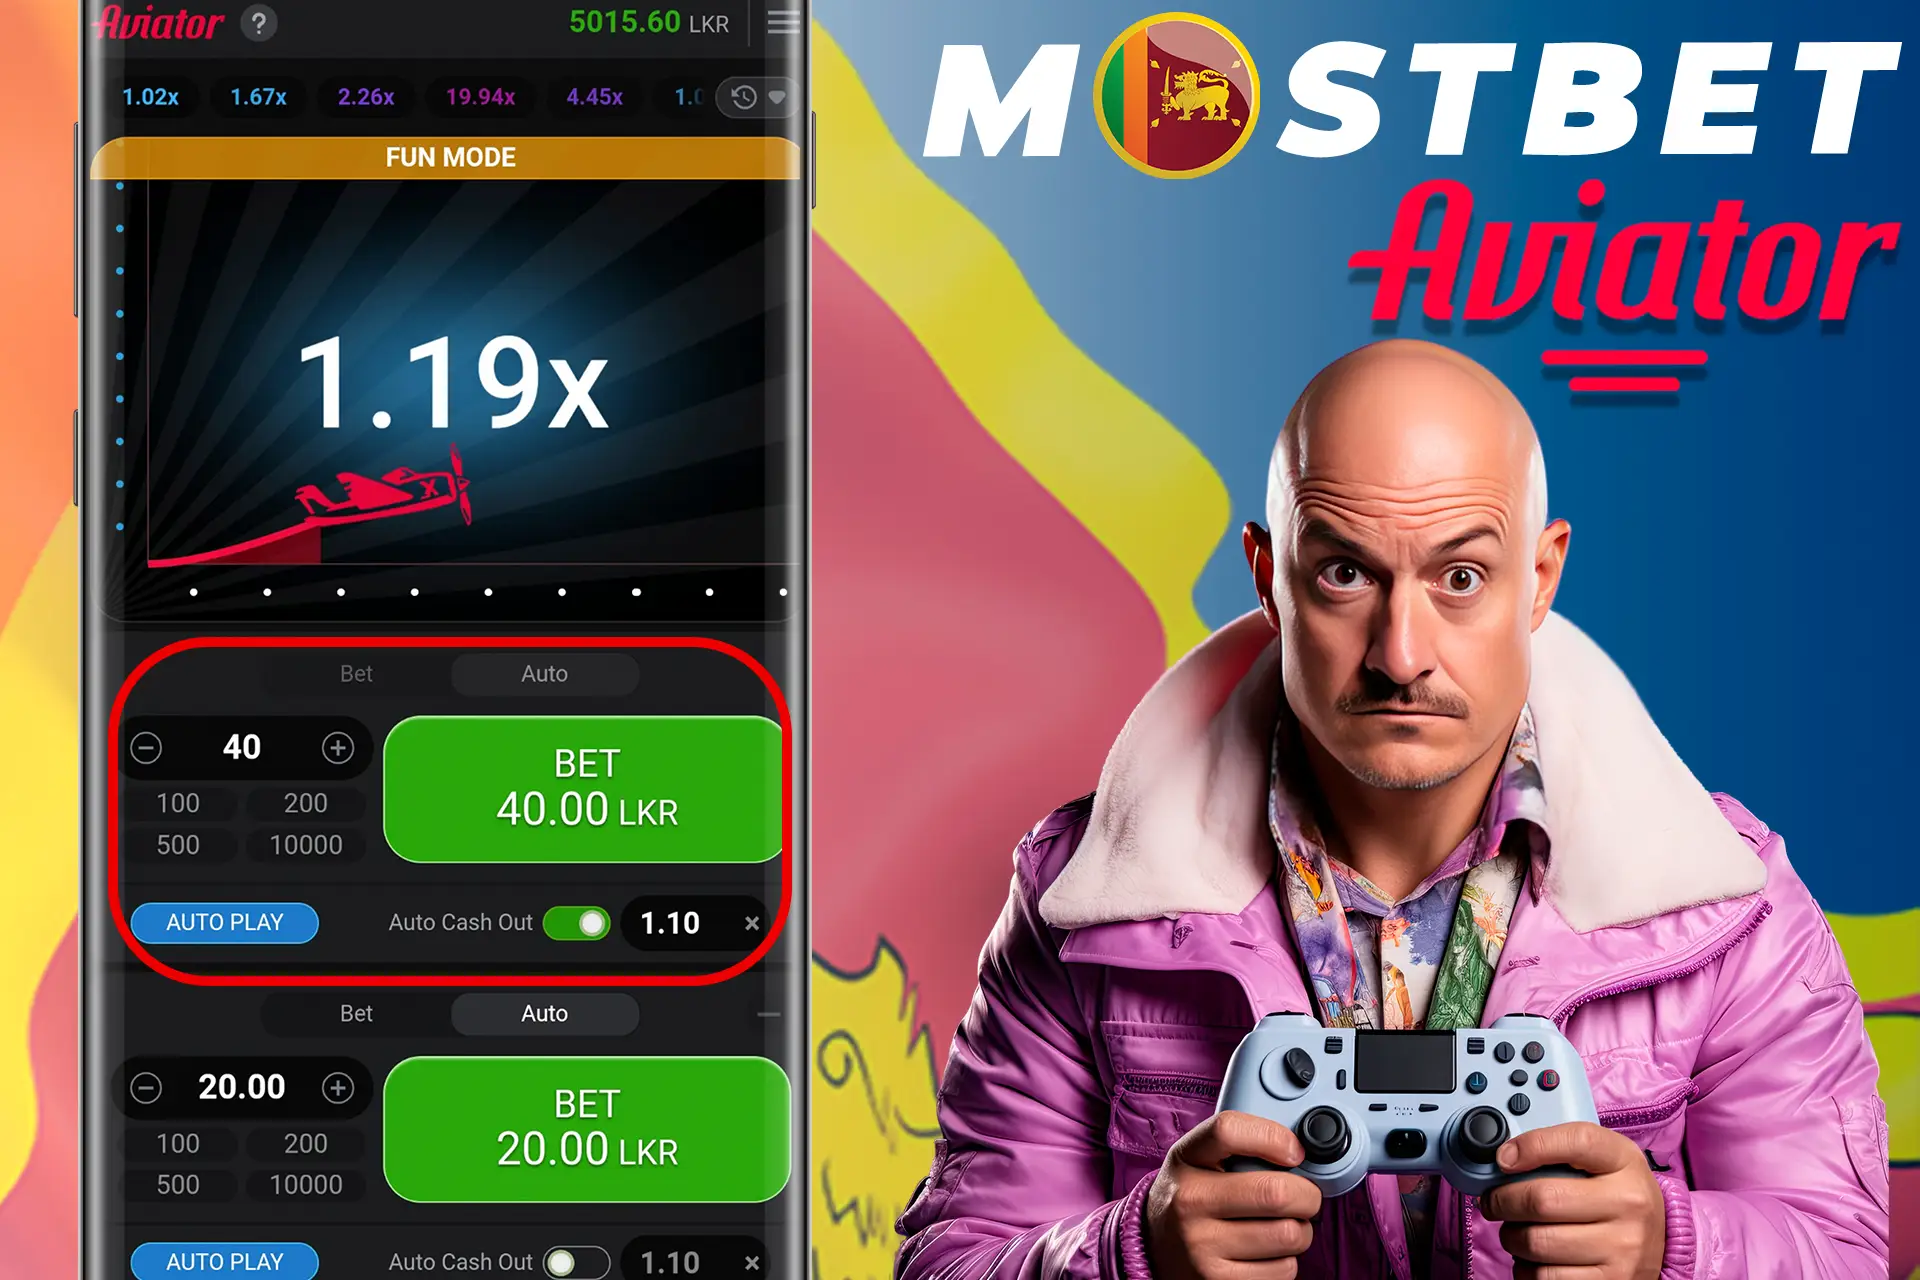 Check out the gameplay of the game Aviator on Mostbet Sri Lanka